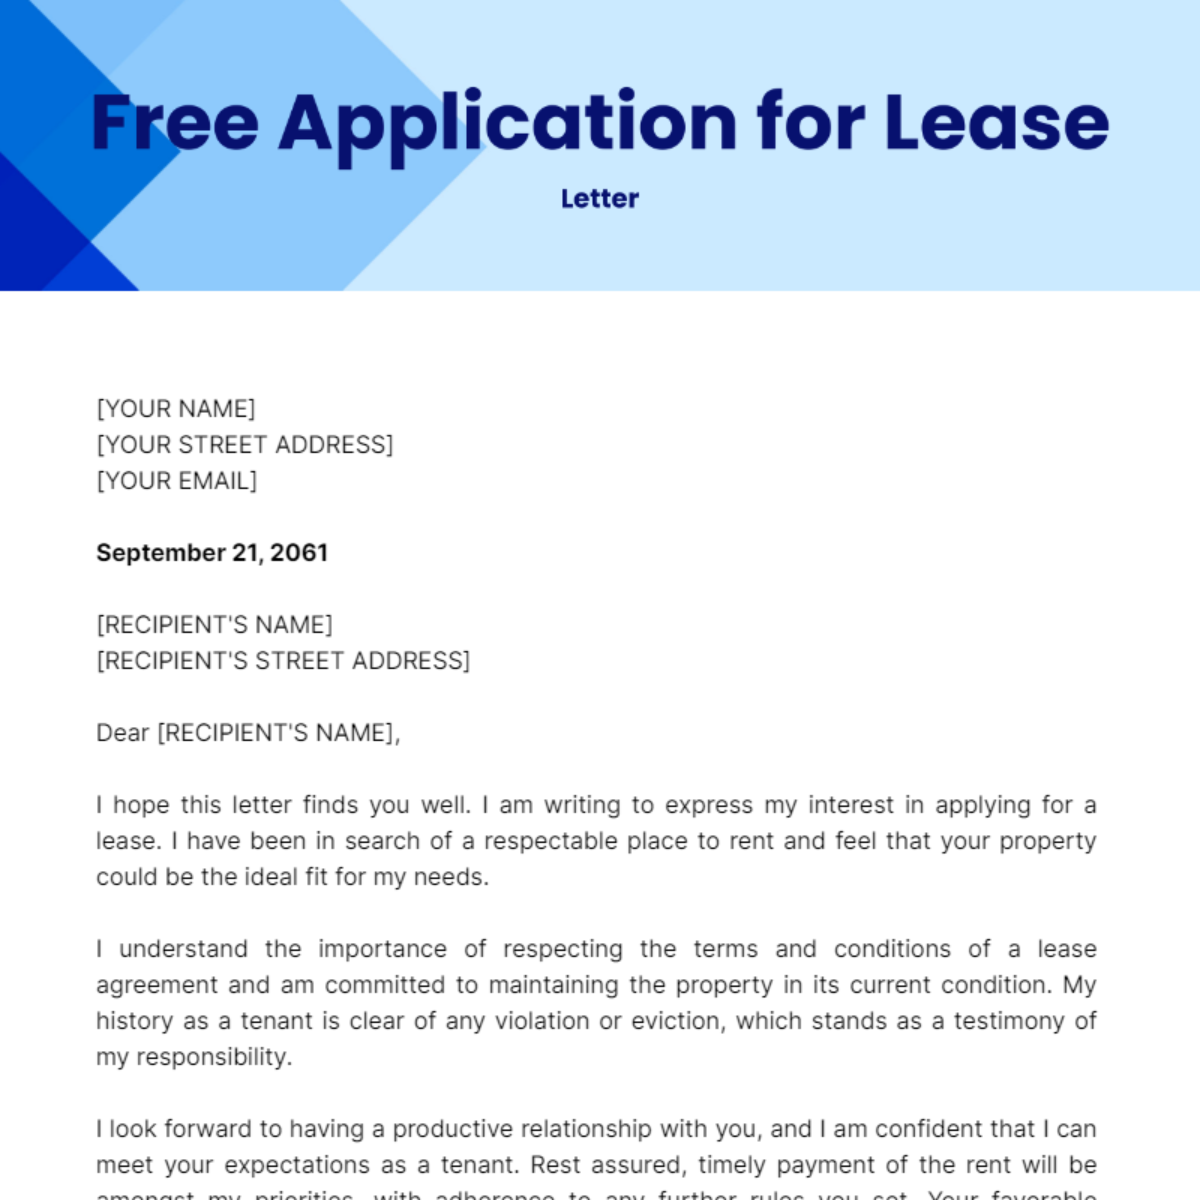 Application for Lease Letter Template